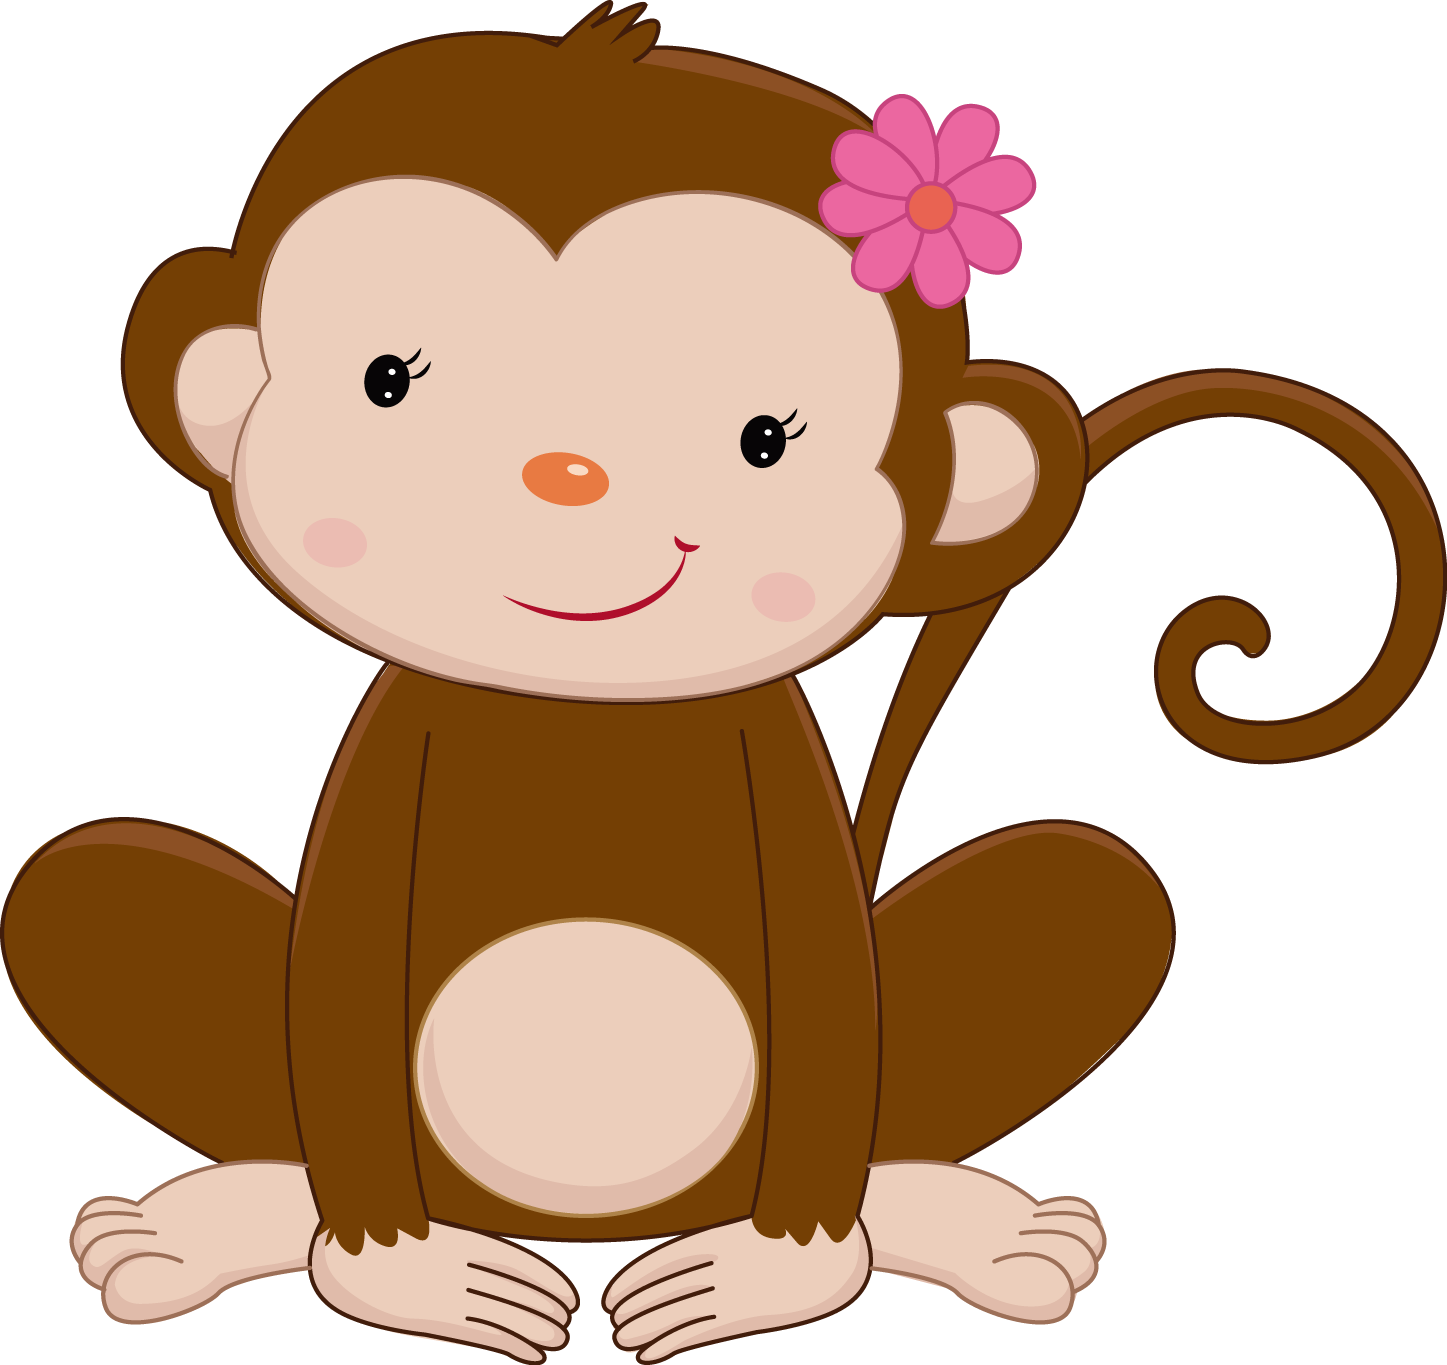 A Cartoon Of A Monkey With A Flower In Her Hair